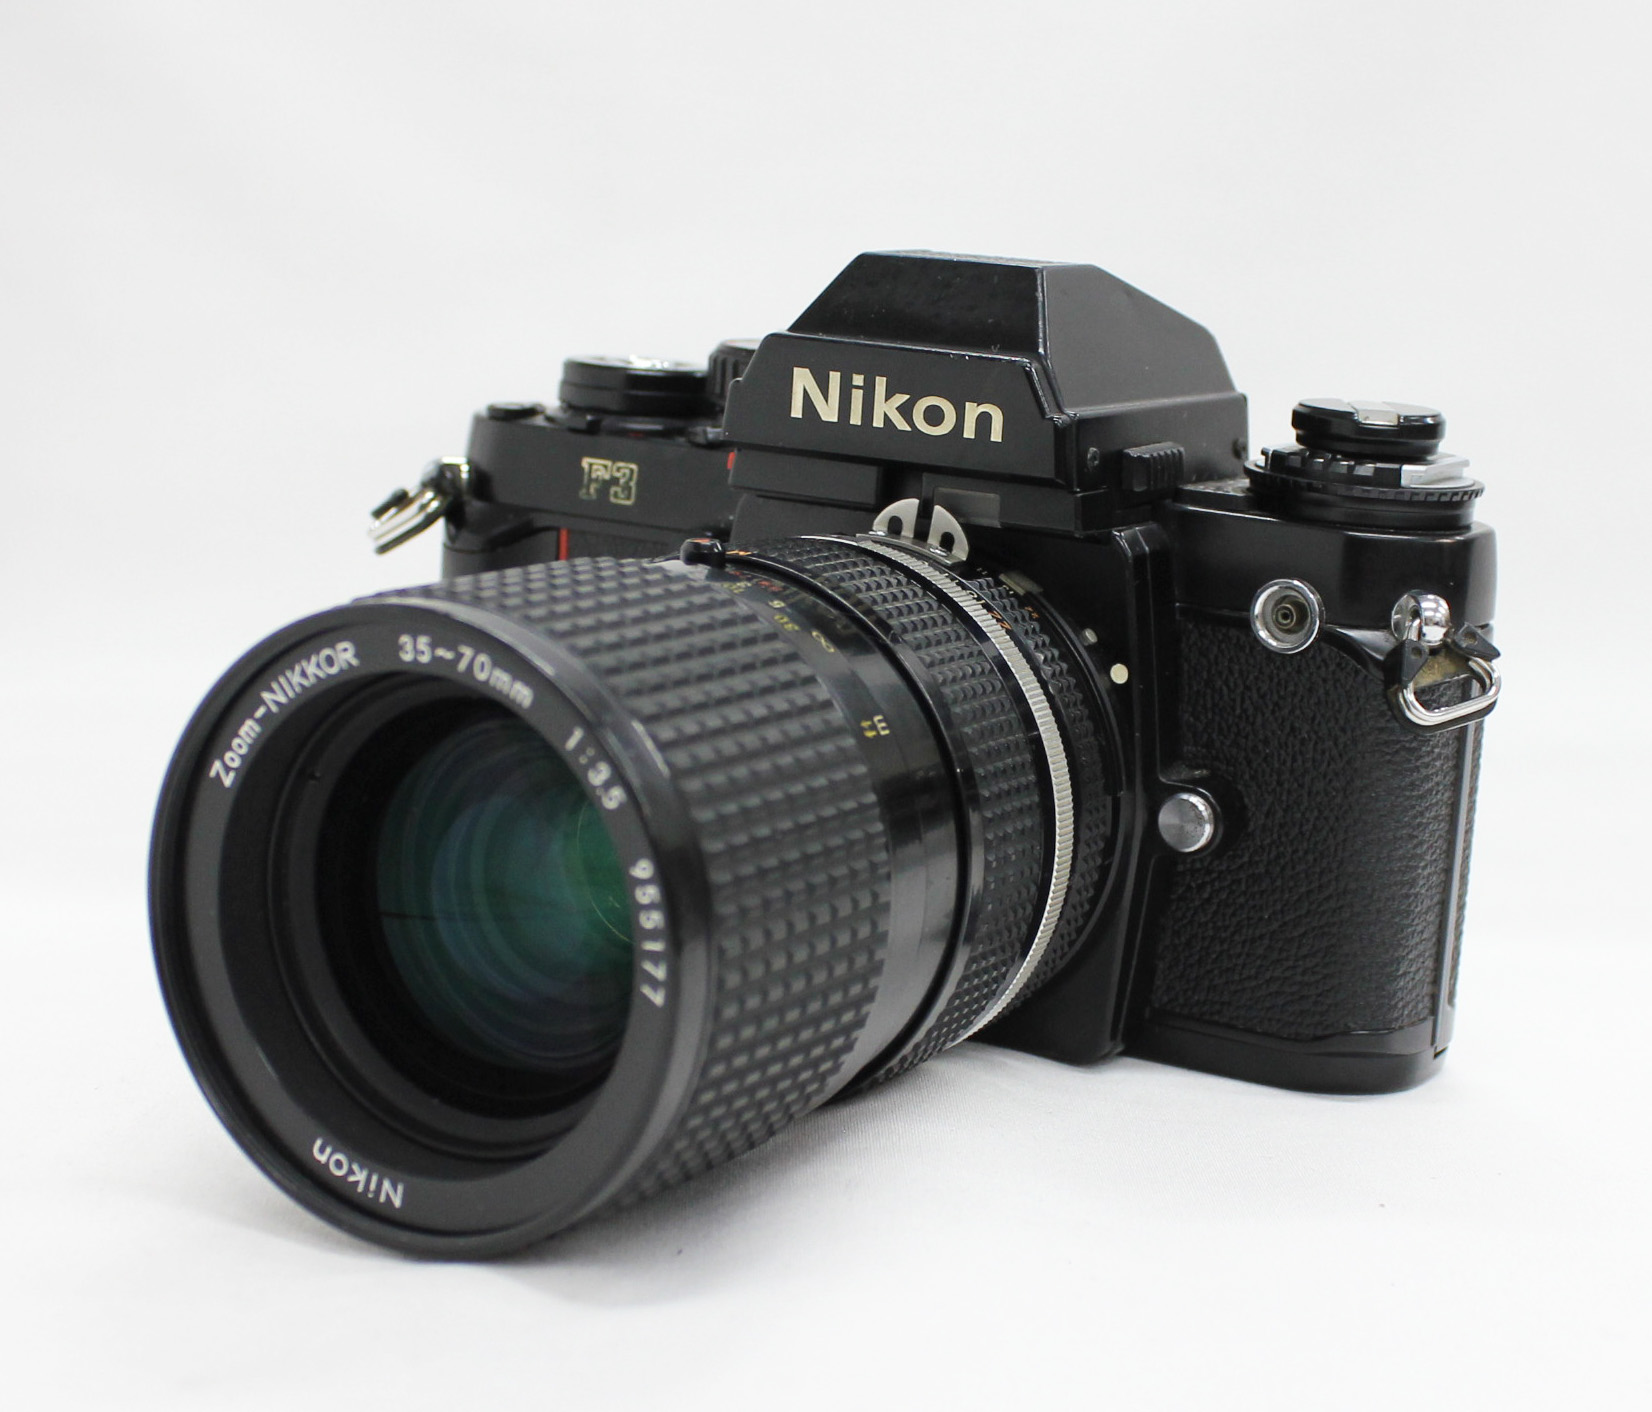 Japan Used Camera Shop | [Excellent+++] Nikon F3 SLR Camera with Ai-s Zoom-Nikkor 35-70mm F/3.5 Lens from Japan